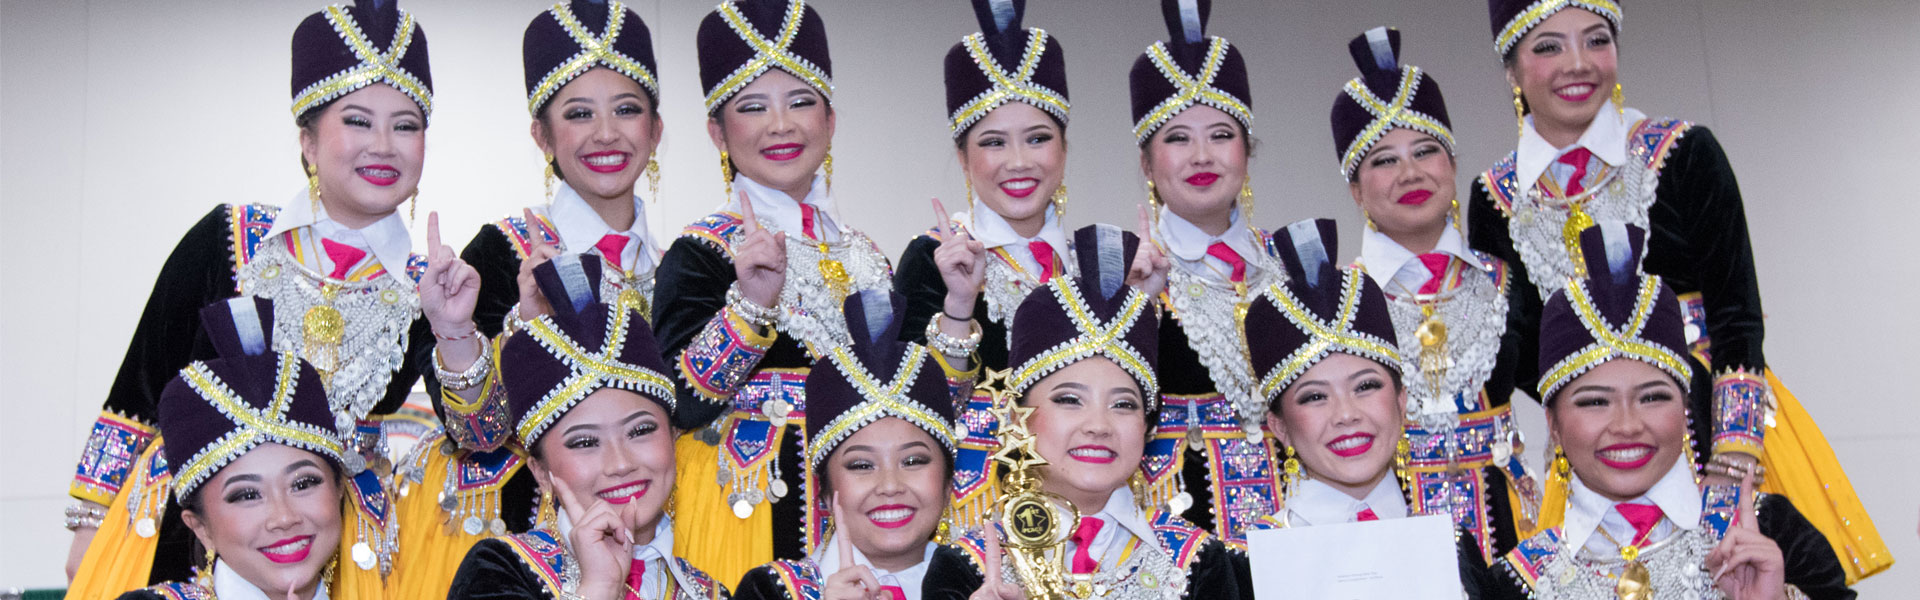 A group of Hmong traditional dancers posing